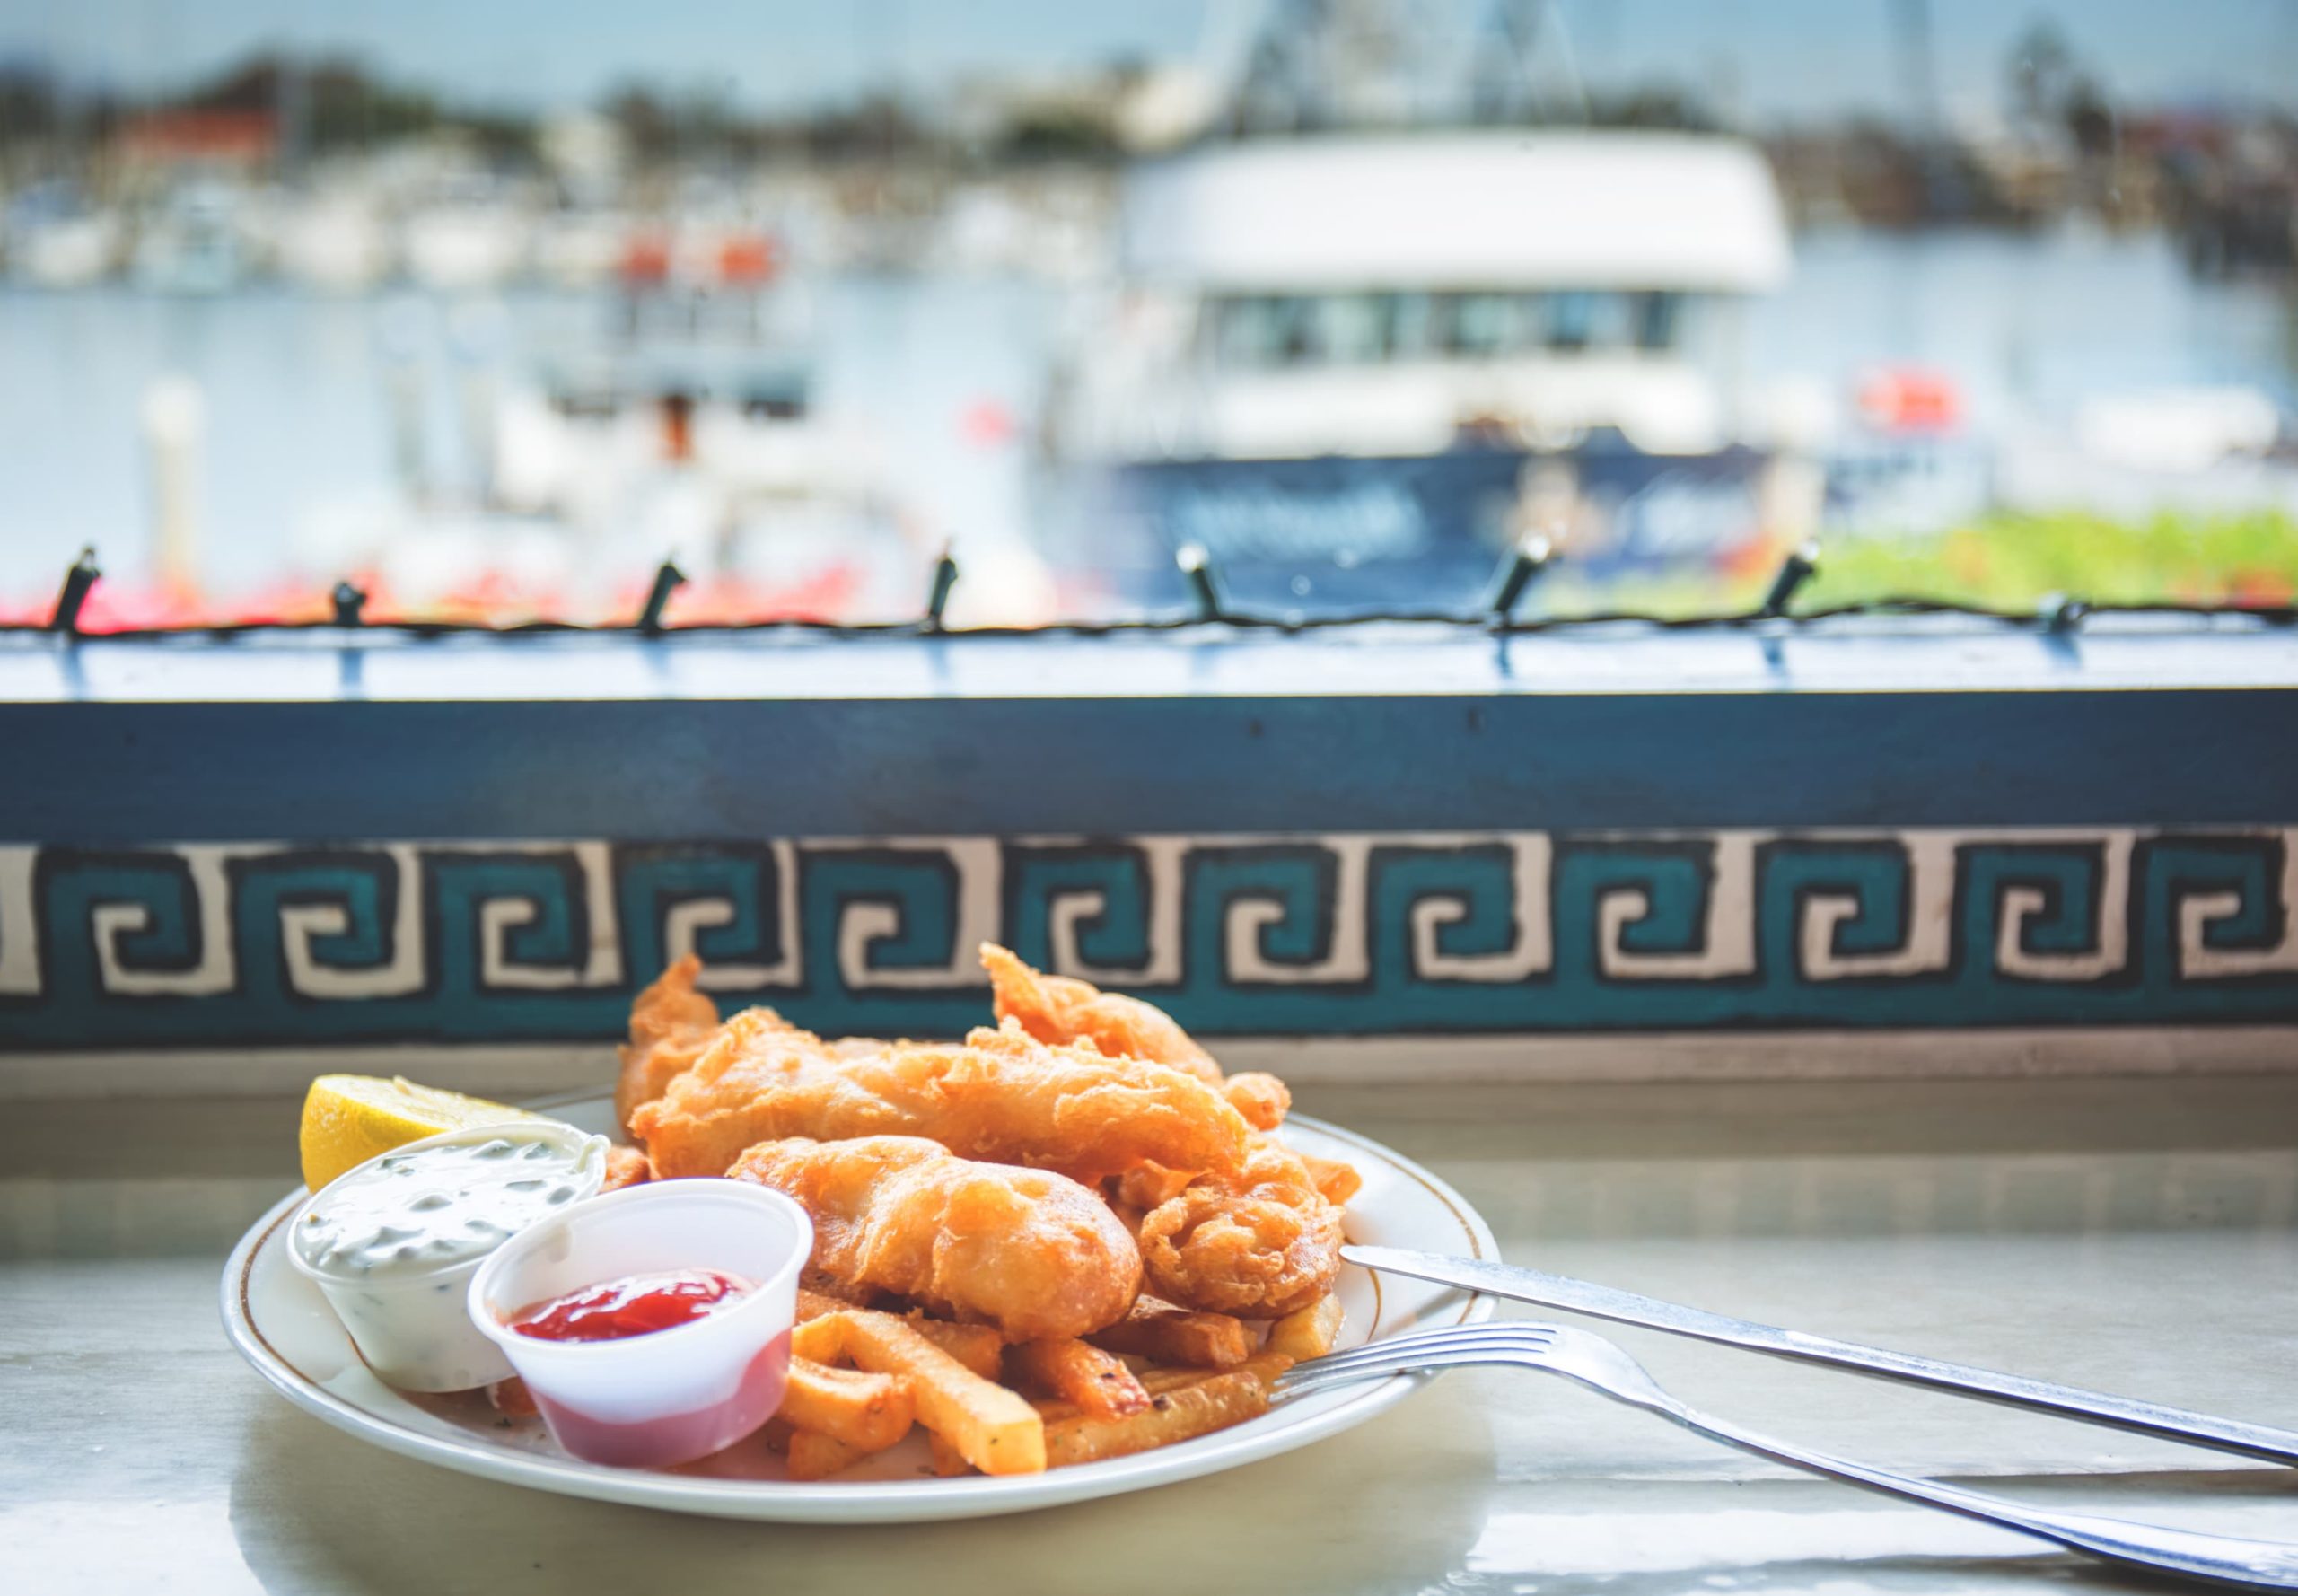 On Takeout Tuesday, Why Not a Repast on the Ventura Harbor Green?